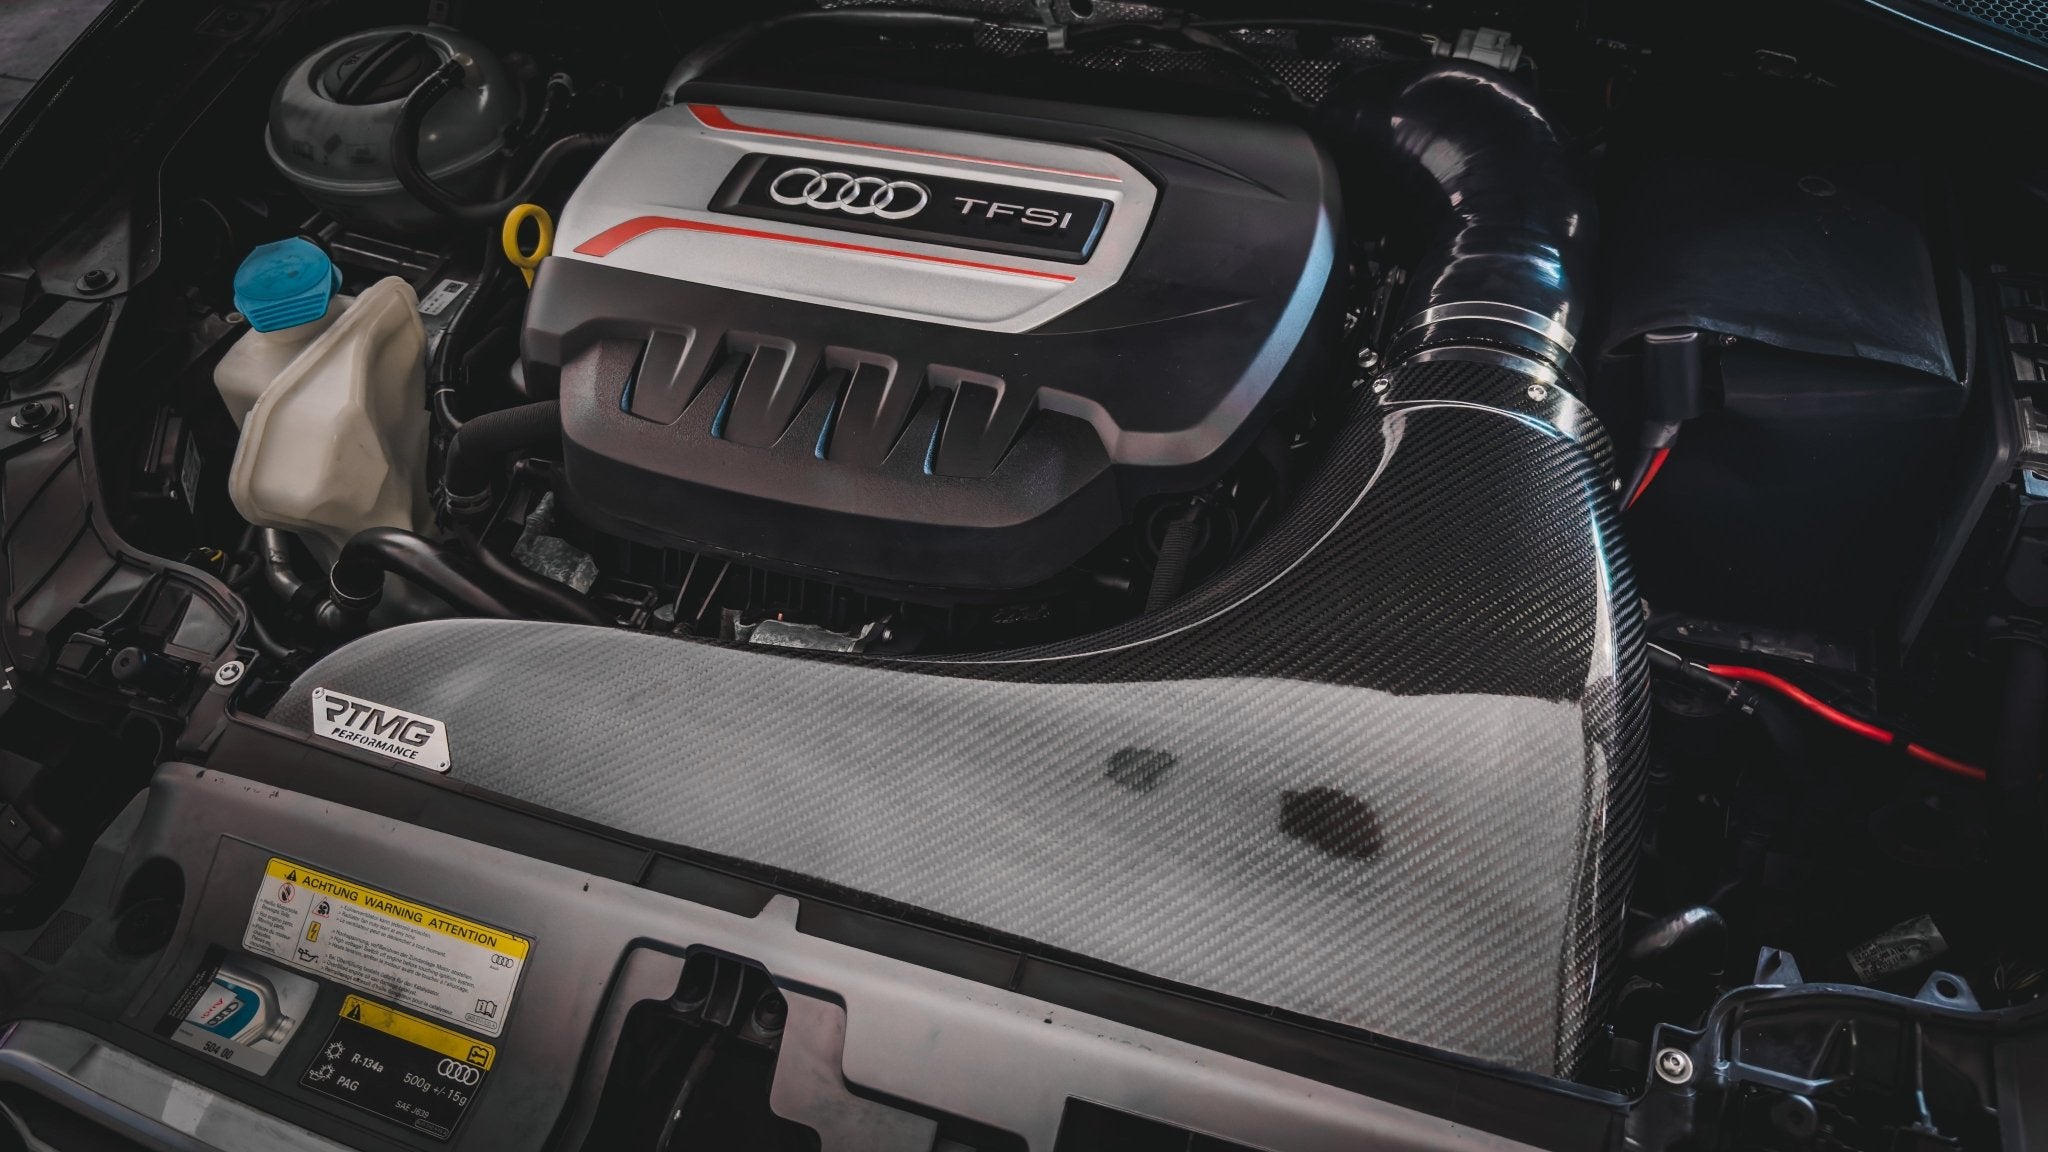 Full Carbon Direct Cold Air Intake for Audi S3 8V - 2.0 TFSI EA888 Gen 3 - RTMG Performance